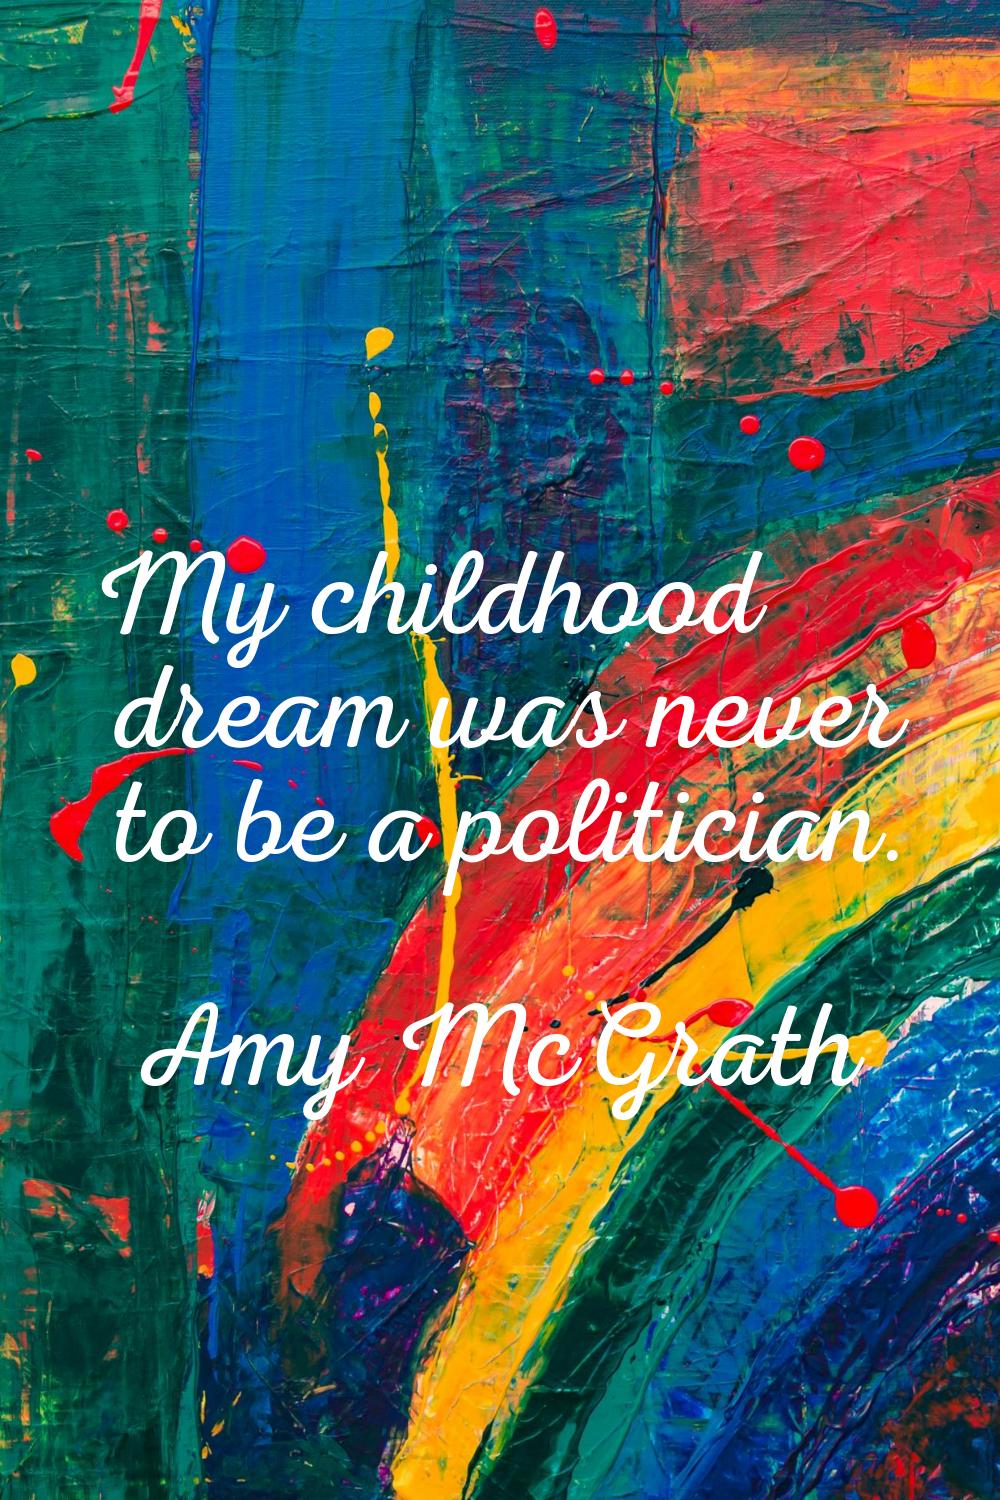 My childhood dream was never to be a politician.